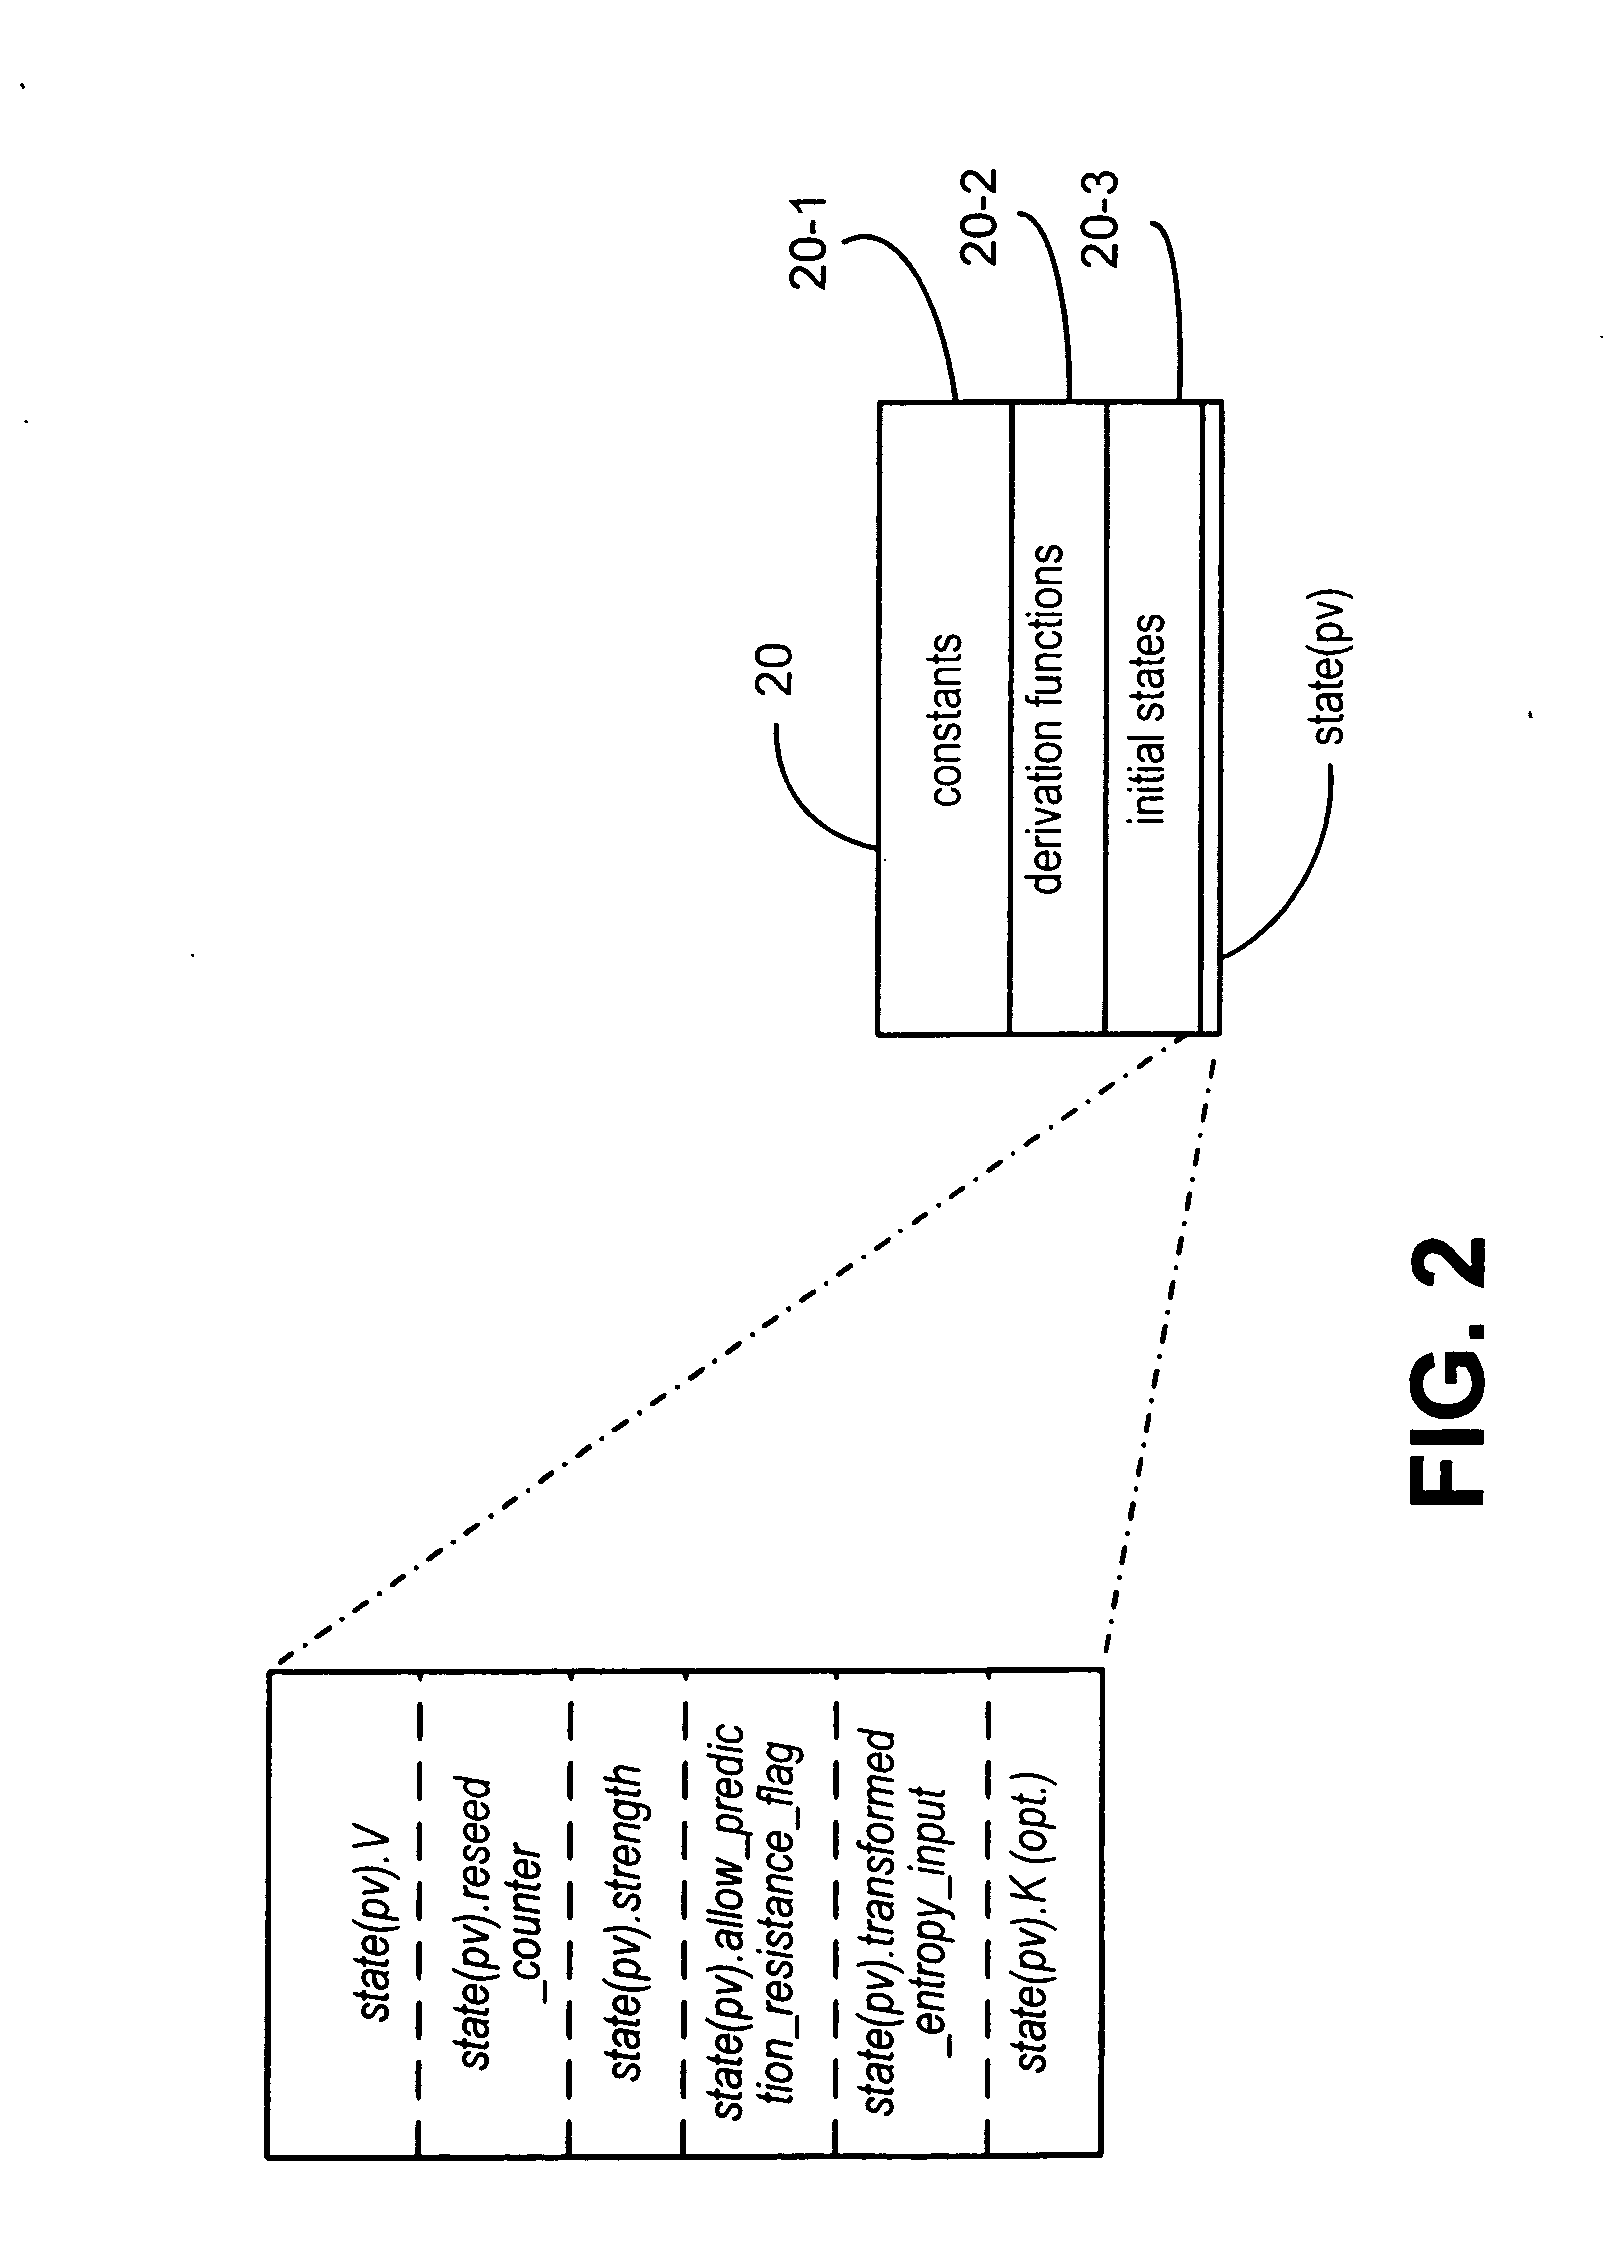 Method and system for generation of cryptographic keys for use in cryptographic systems